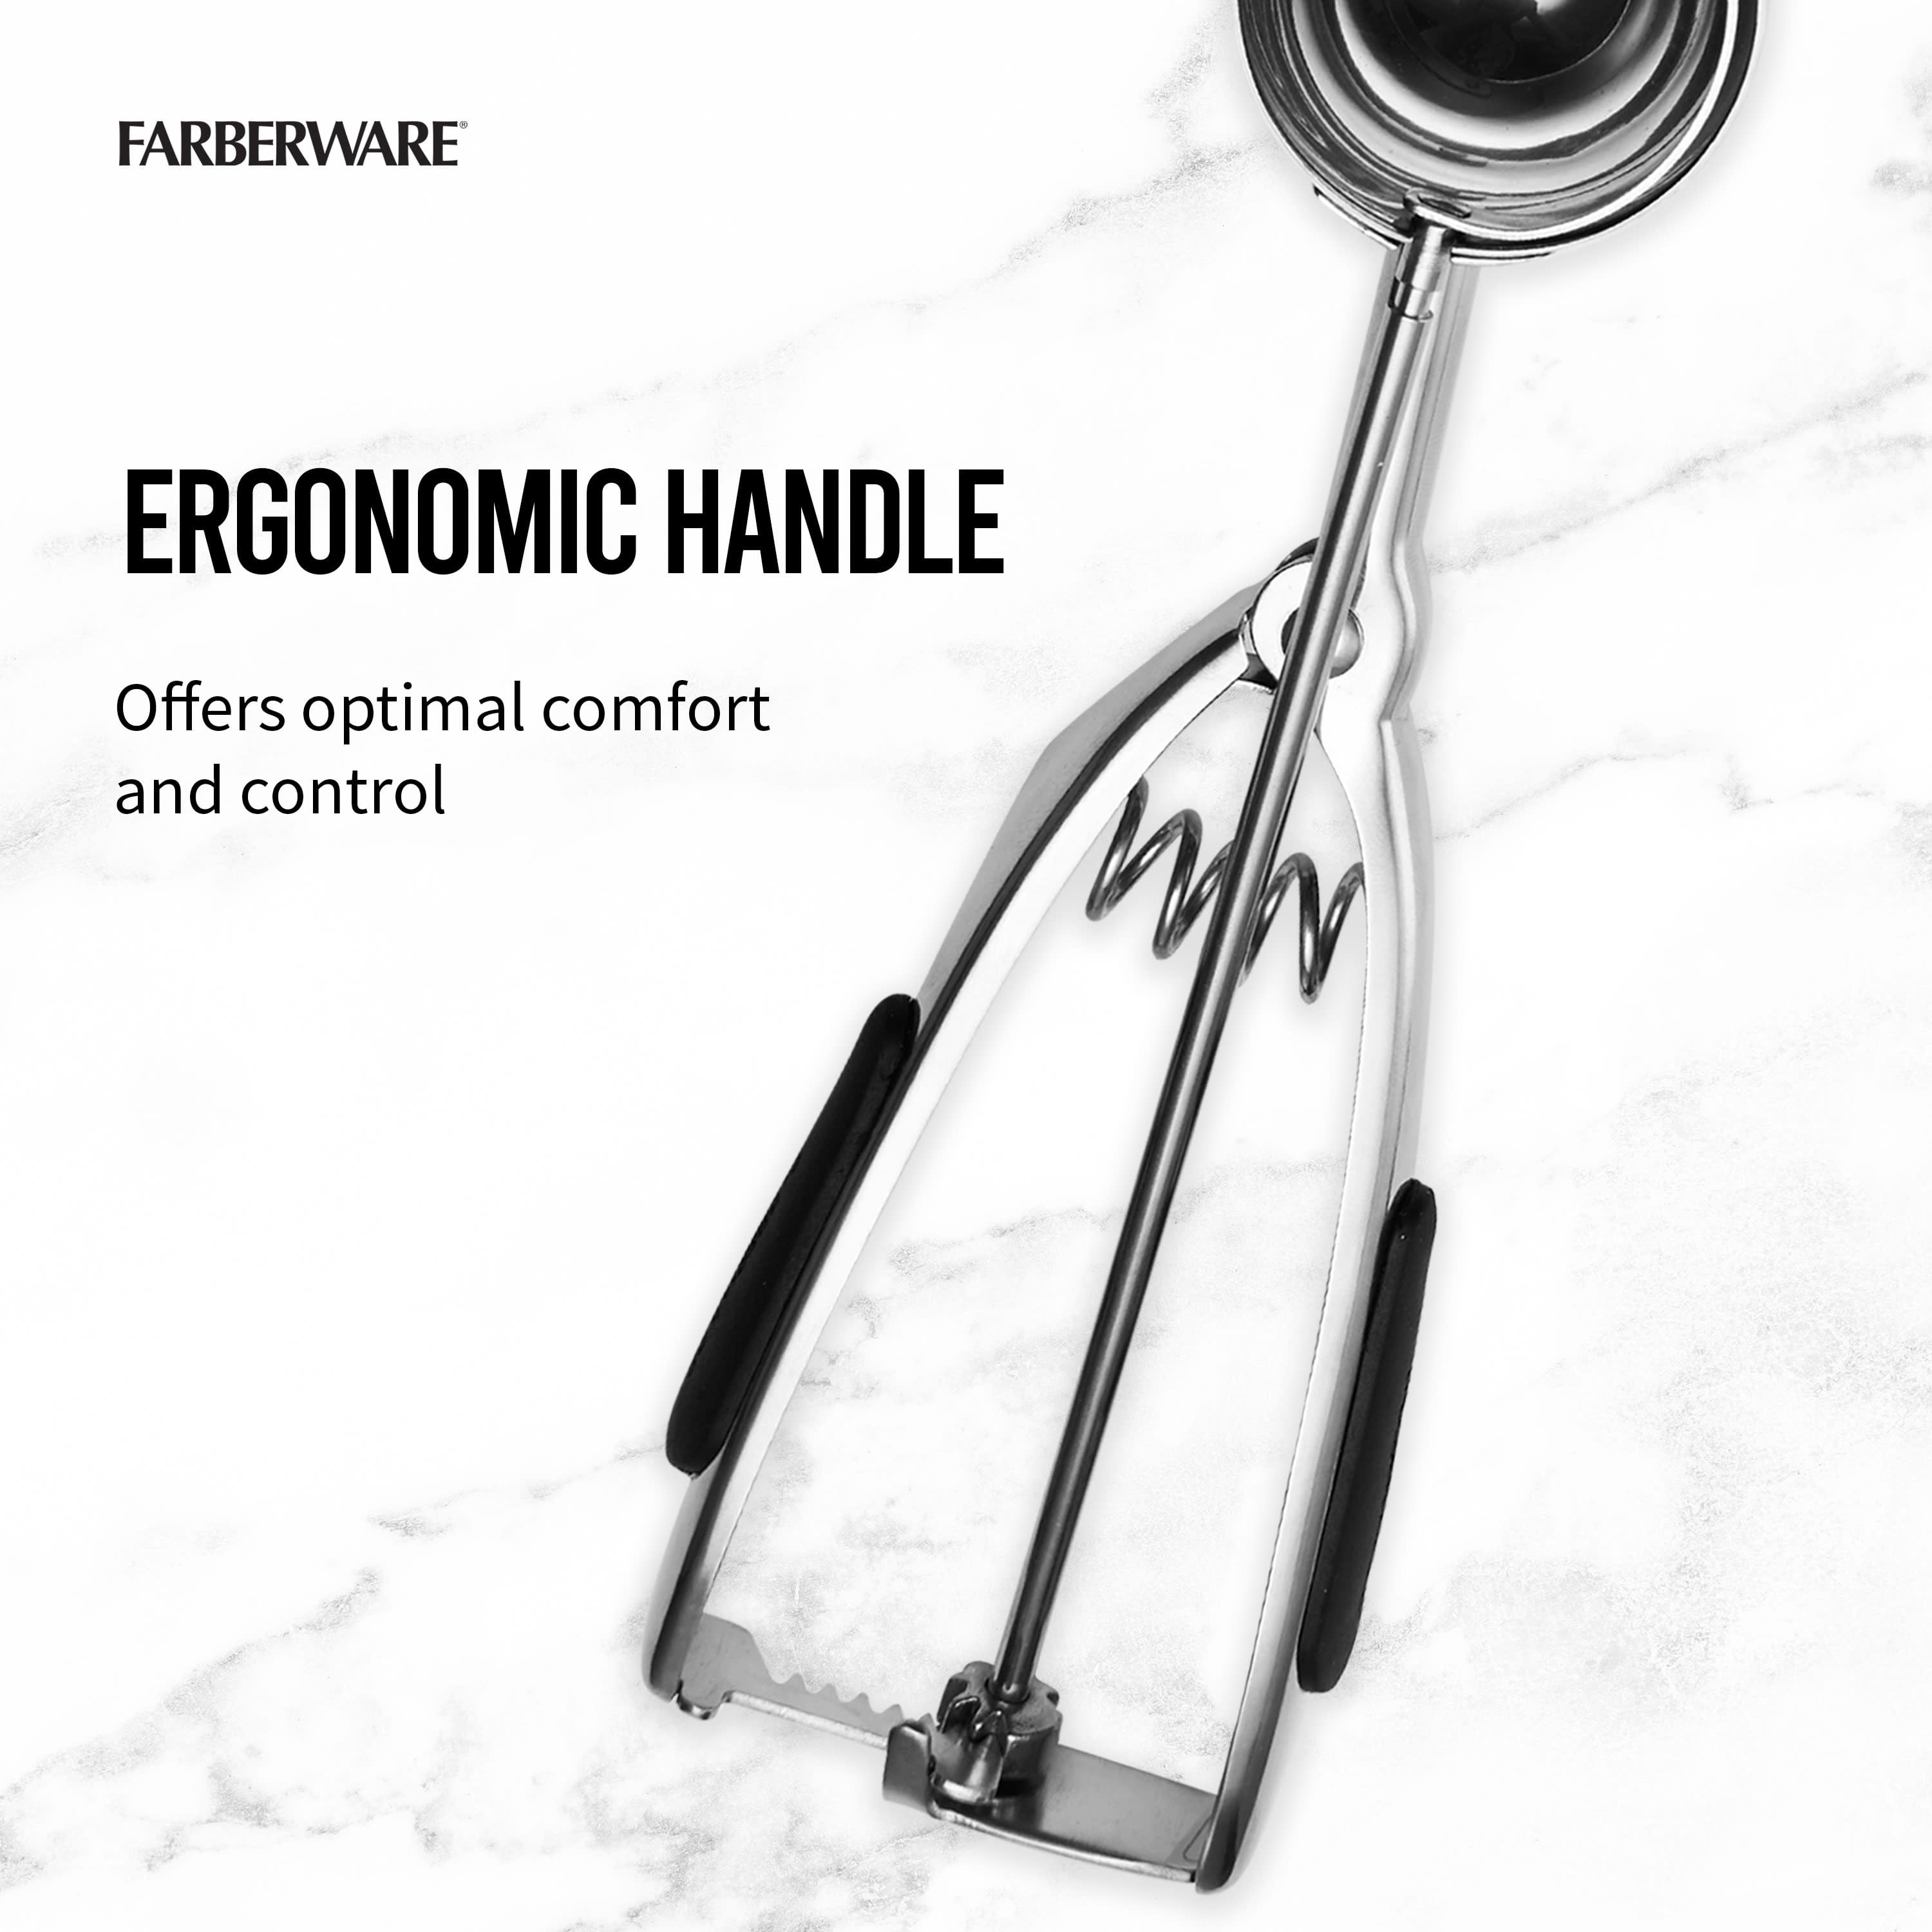 Farberware Professional Cookie Dough Scoop, Stainless Steel at Select a  Store, Neighborhood Grocery Store & Pharmacy